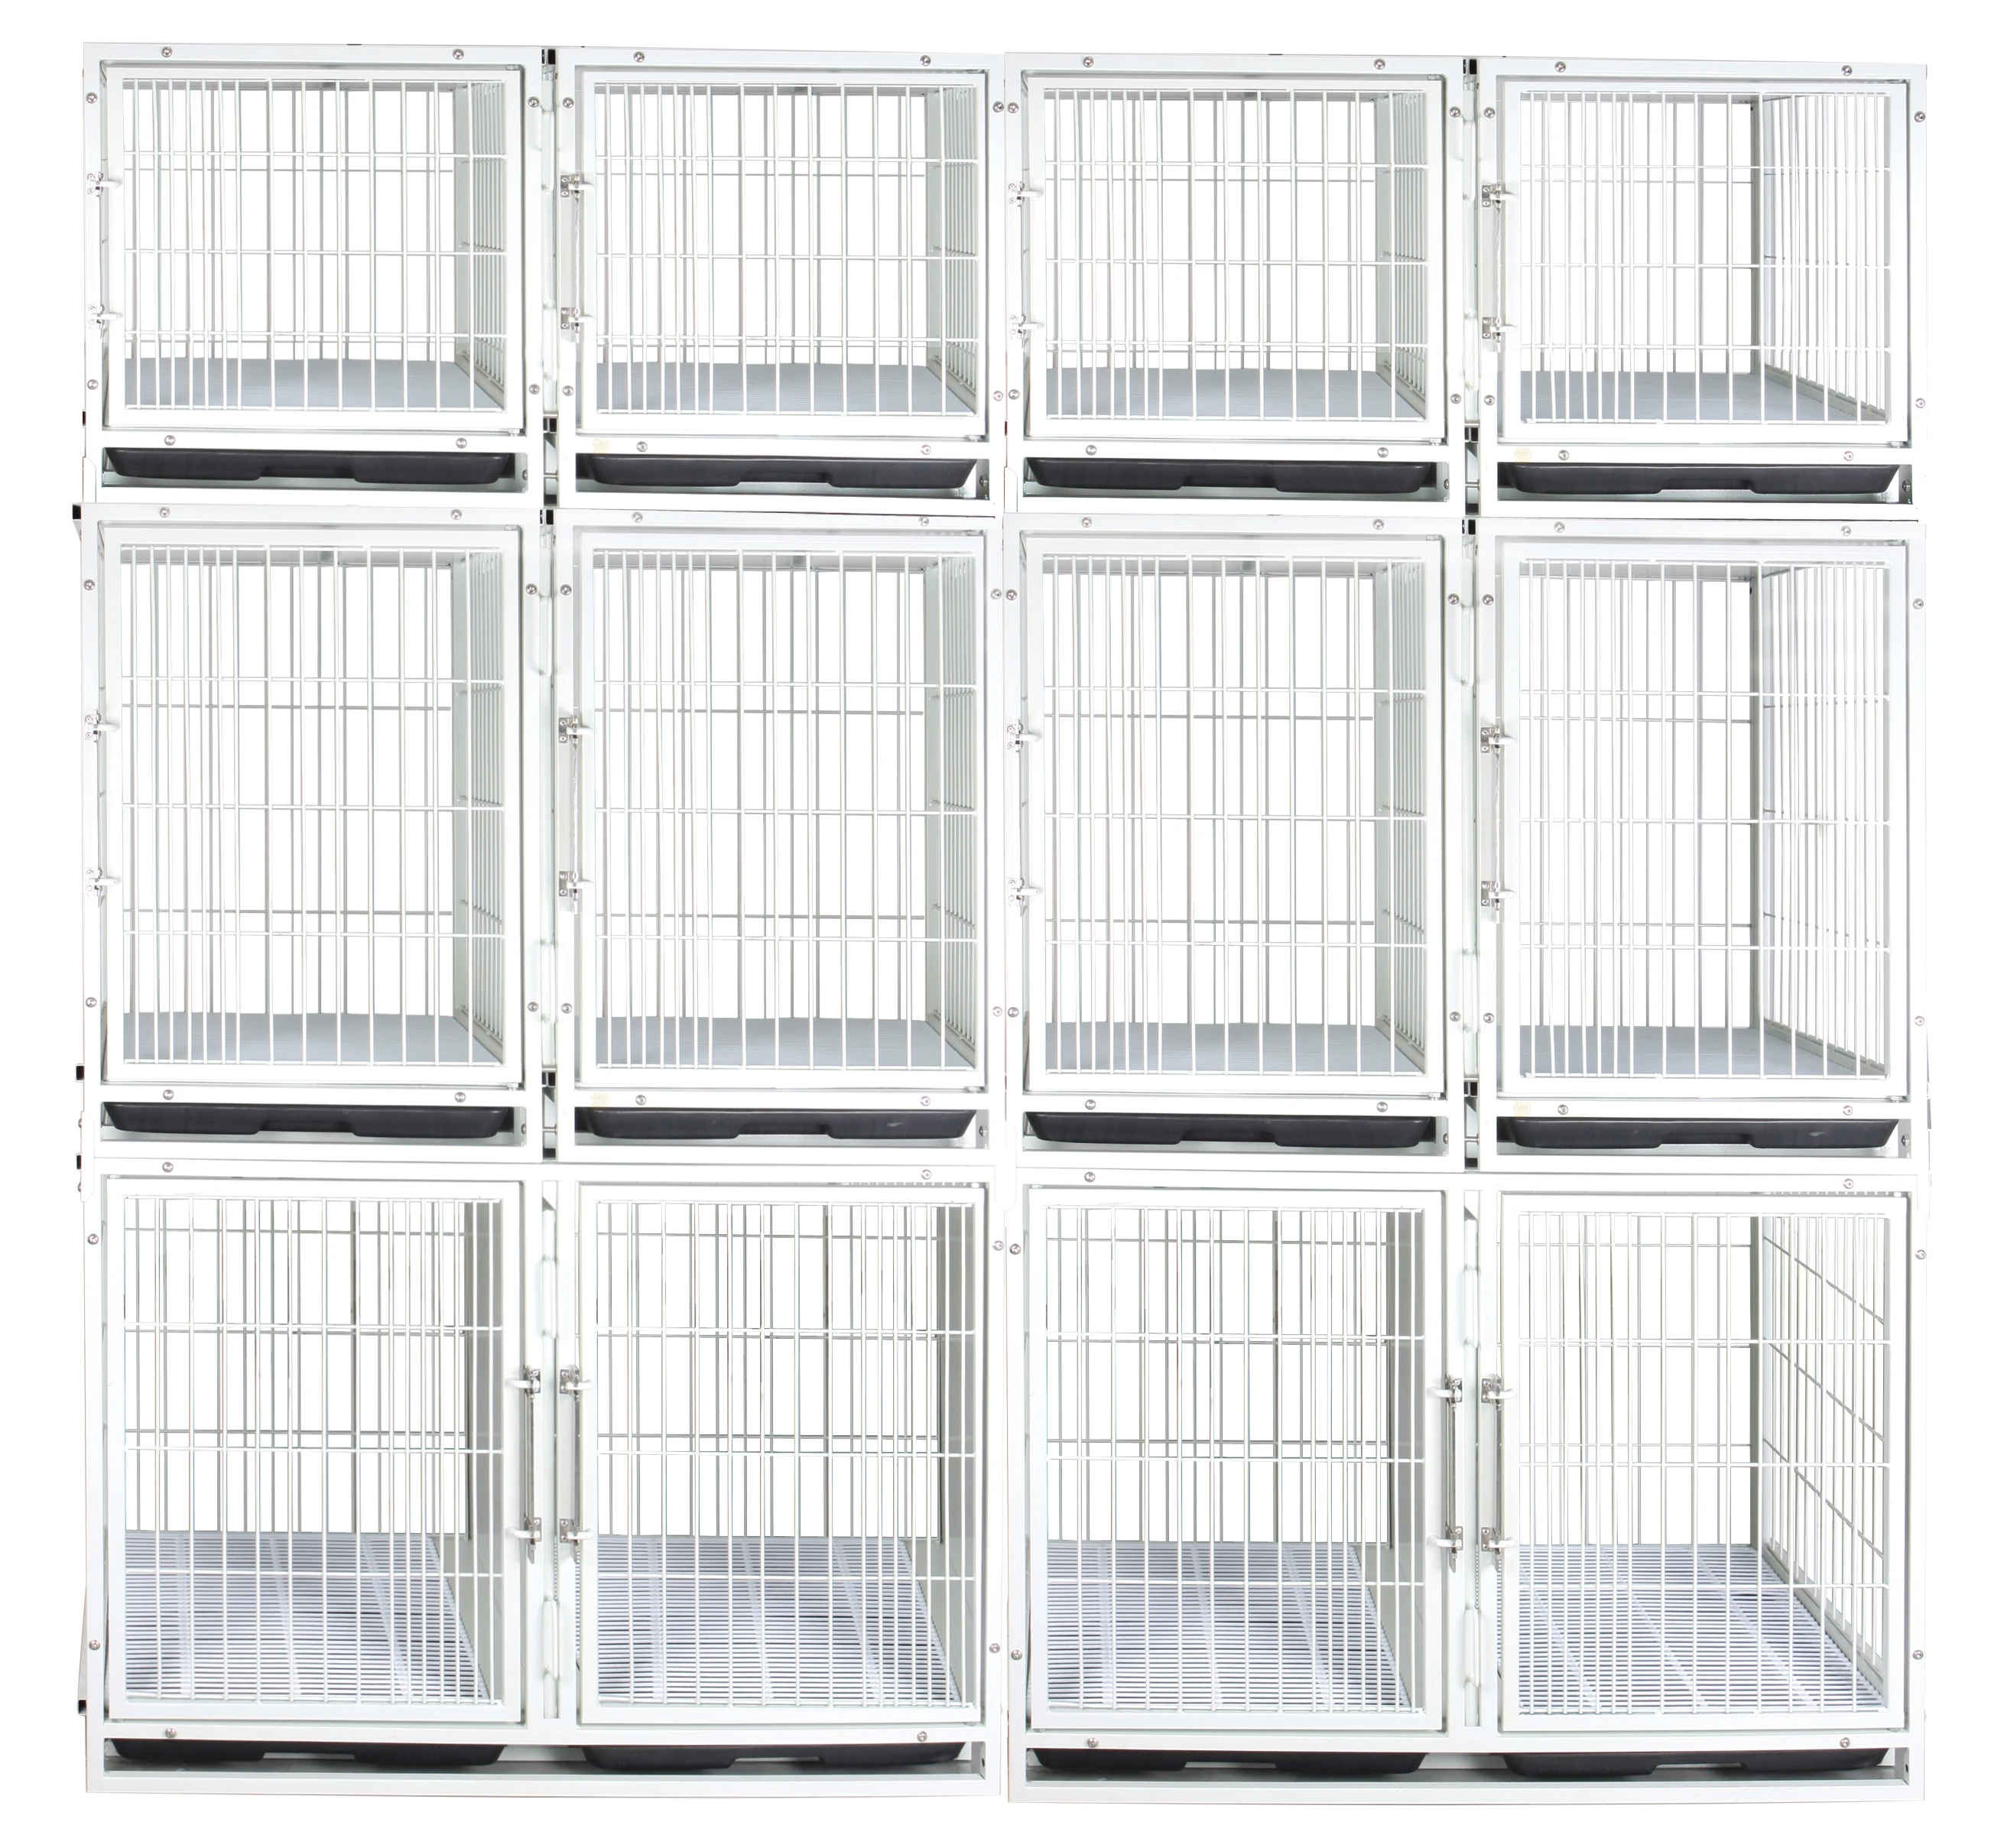 KA-503 Dog Double Deck Powder Coated Steel Cage Pet Cages Modular Kennel Bank (WIRE)